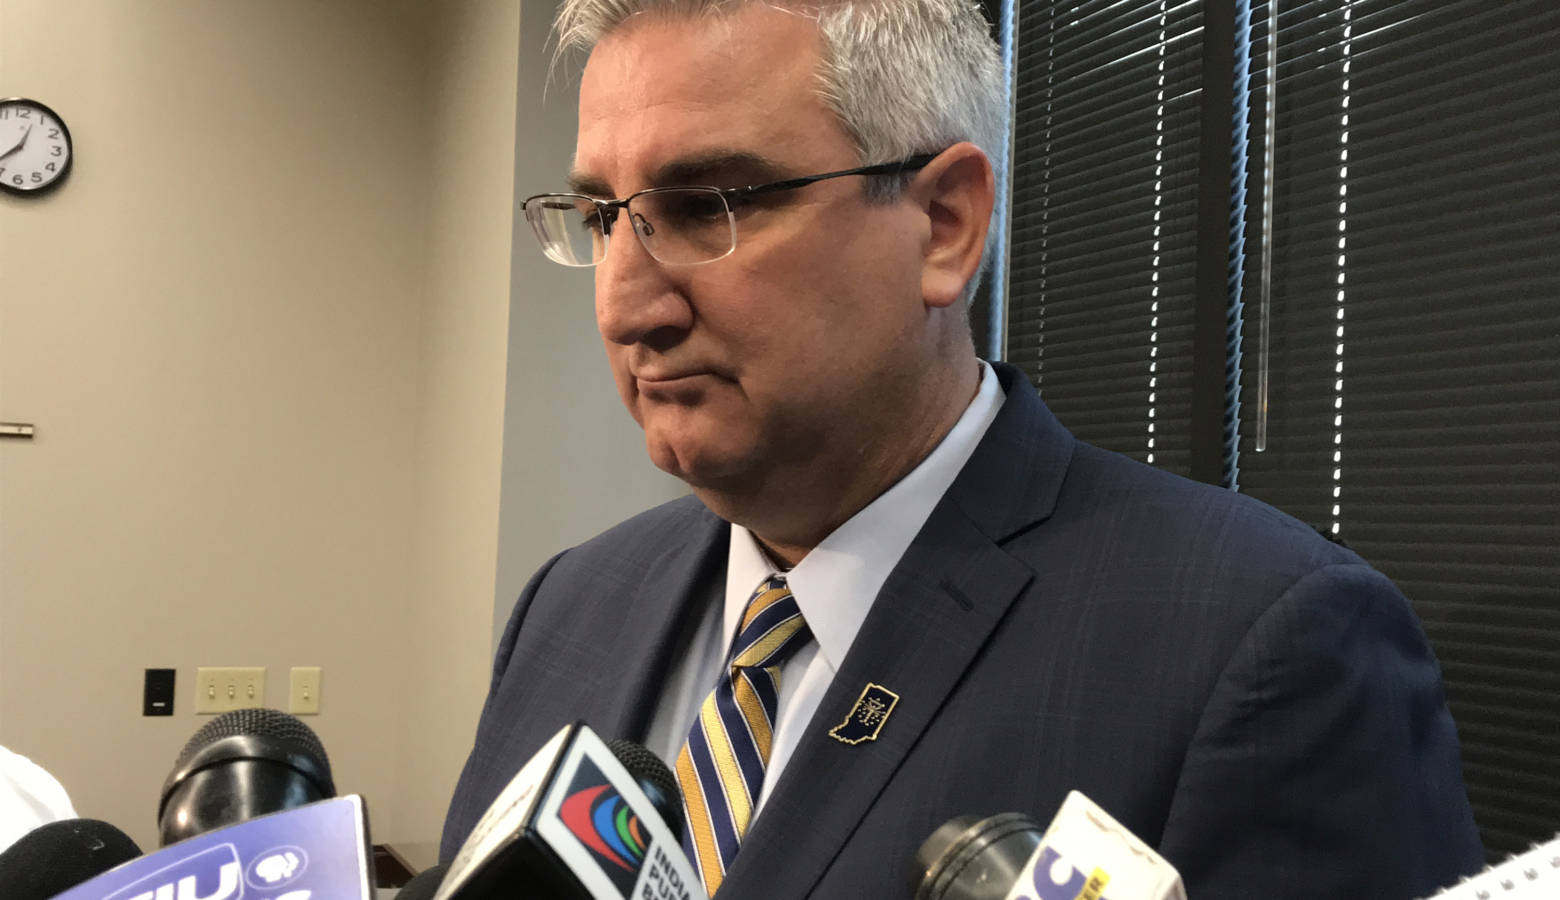 Gov. Eric Holcomb says he and the Department of Child Services are "wide open" to input from everyone in the child welfare system. (Brandon Smith/IPB News)